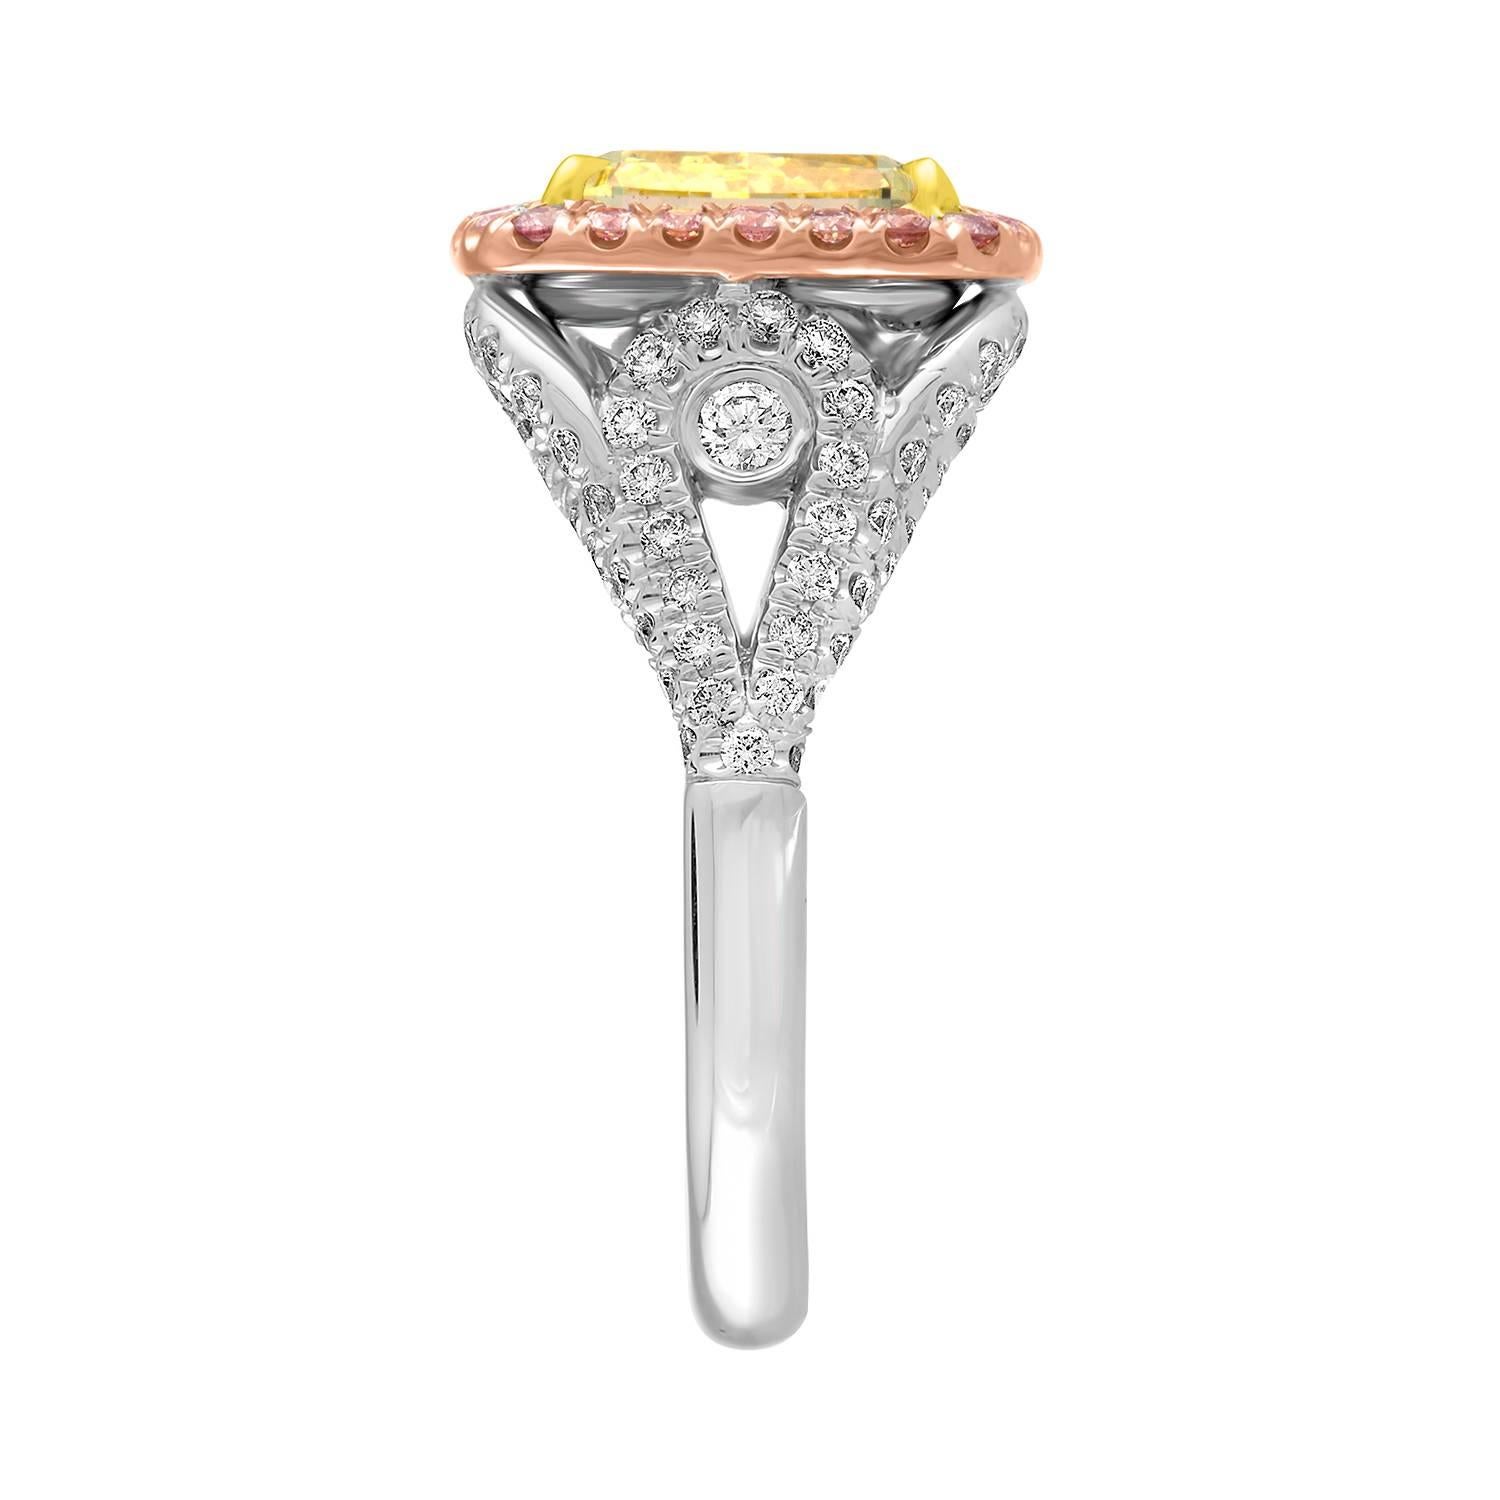 Contemporary 5.03 GIA Fancy Yellow Cushion Cut Diamond in Tri-Color Ring